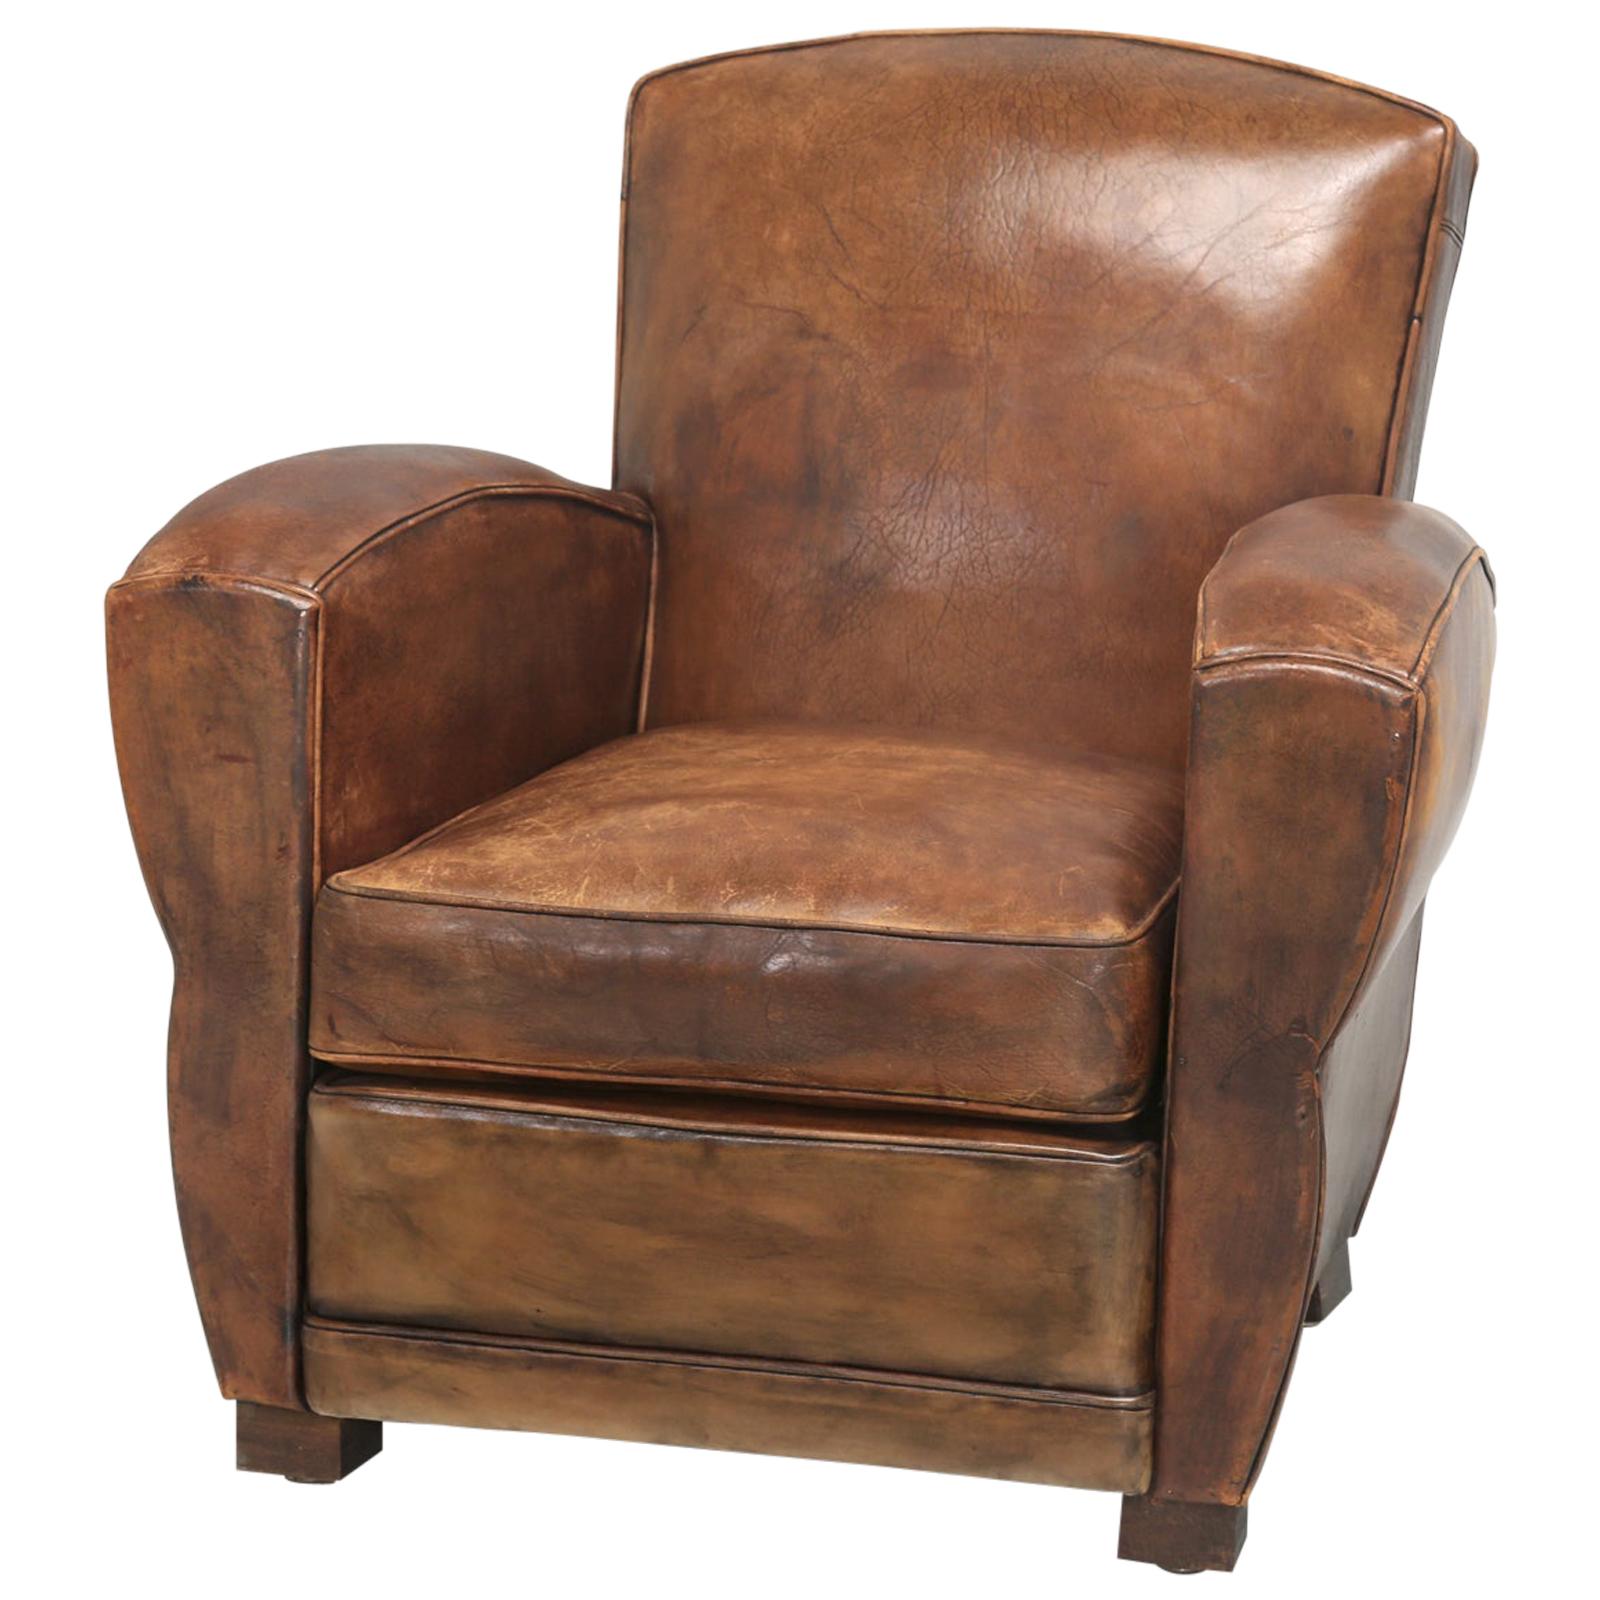 French Leather Club Chair Restored Internally, but Kept Cosmetically Original